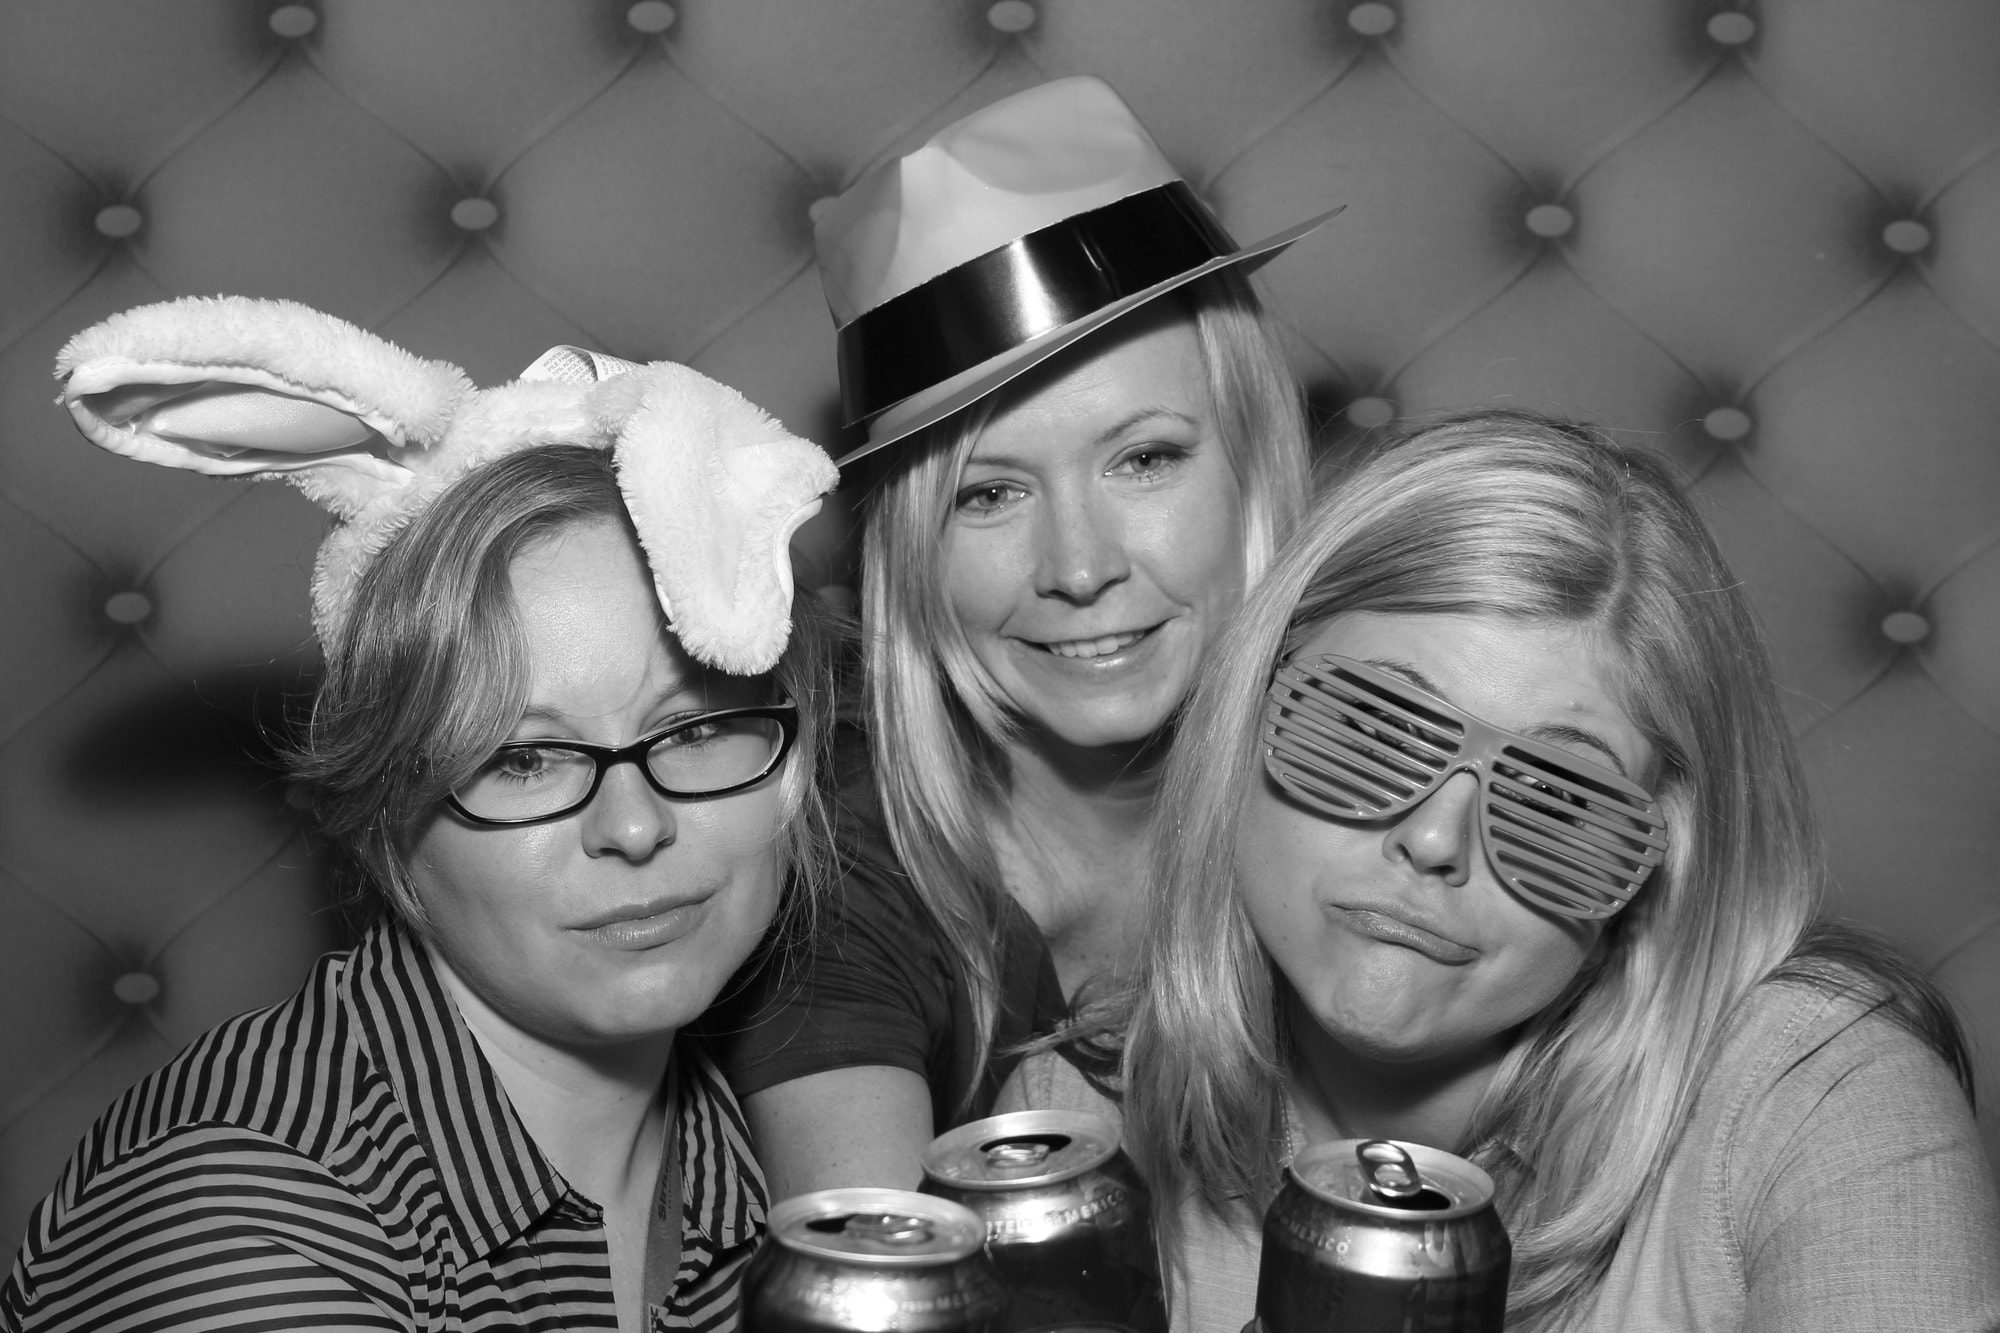 h-Rental-Hats-Photography-Events-Memories-No. 1-Fun-Austin-SWSX-Company-Corporate